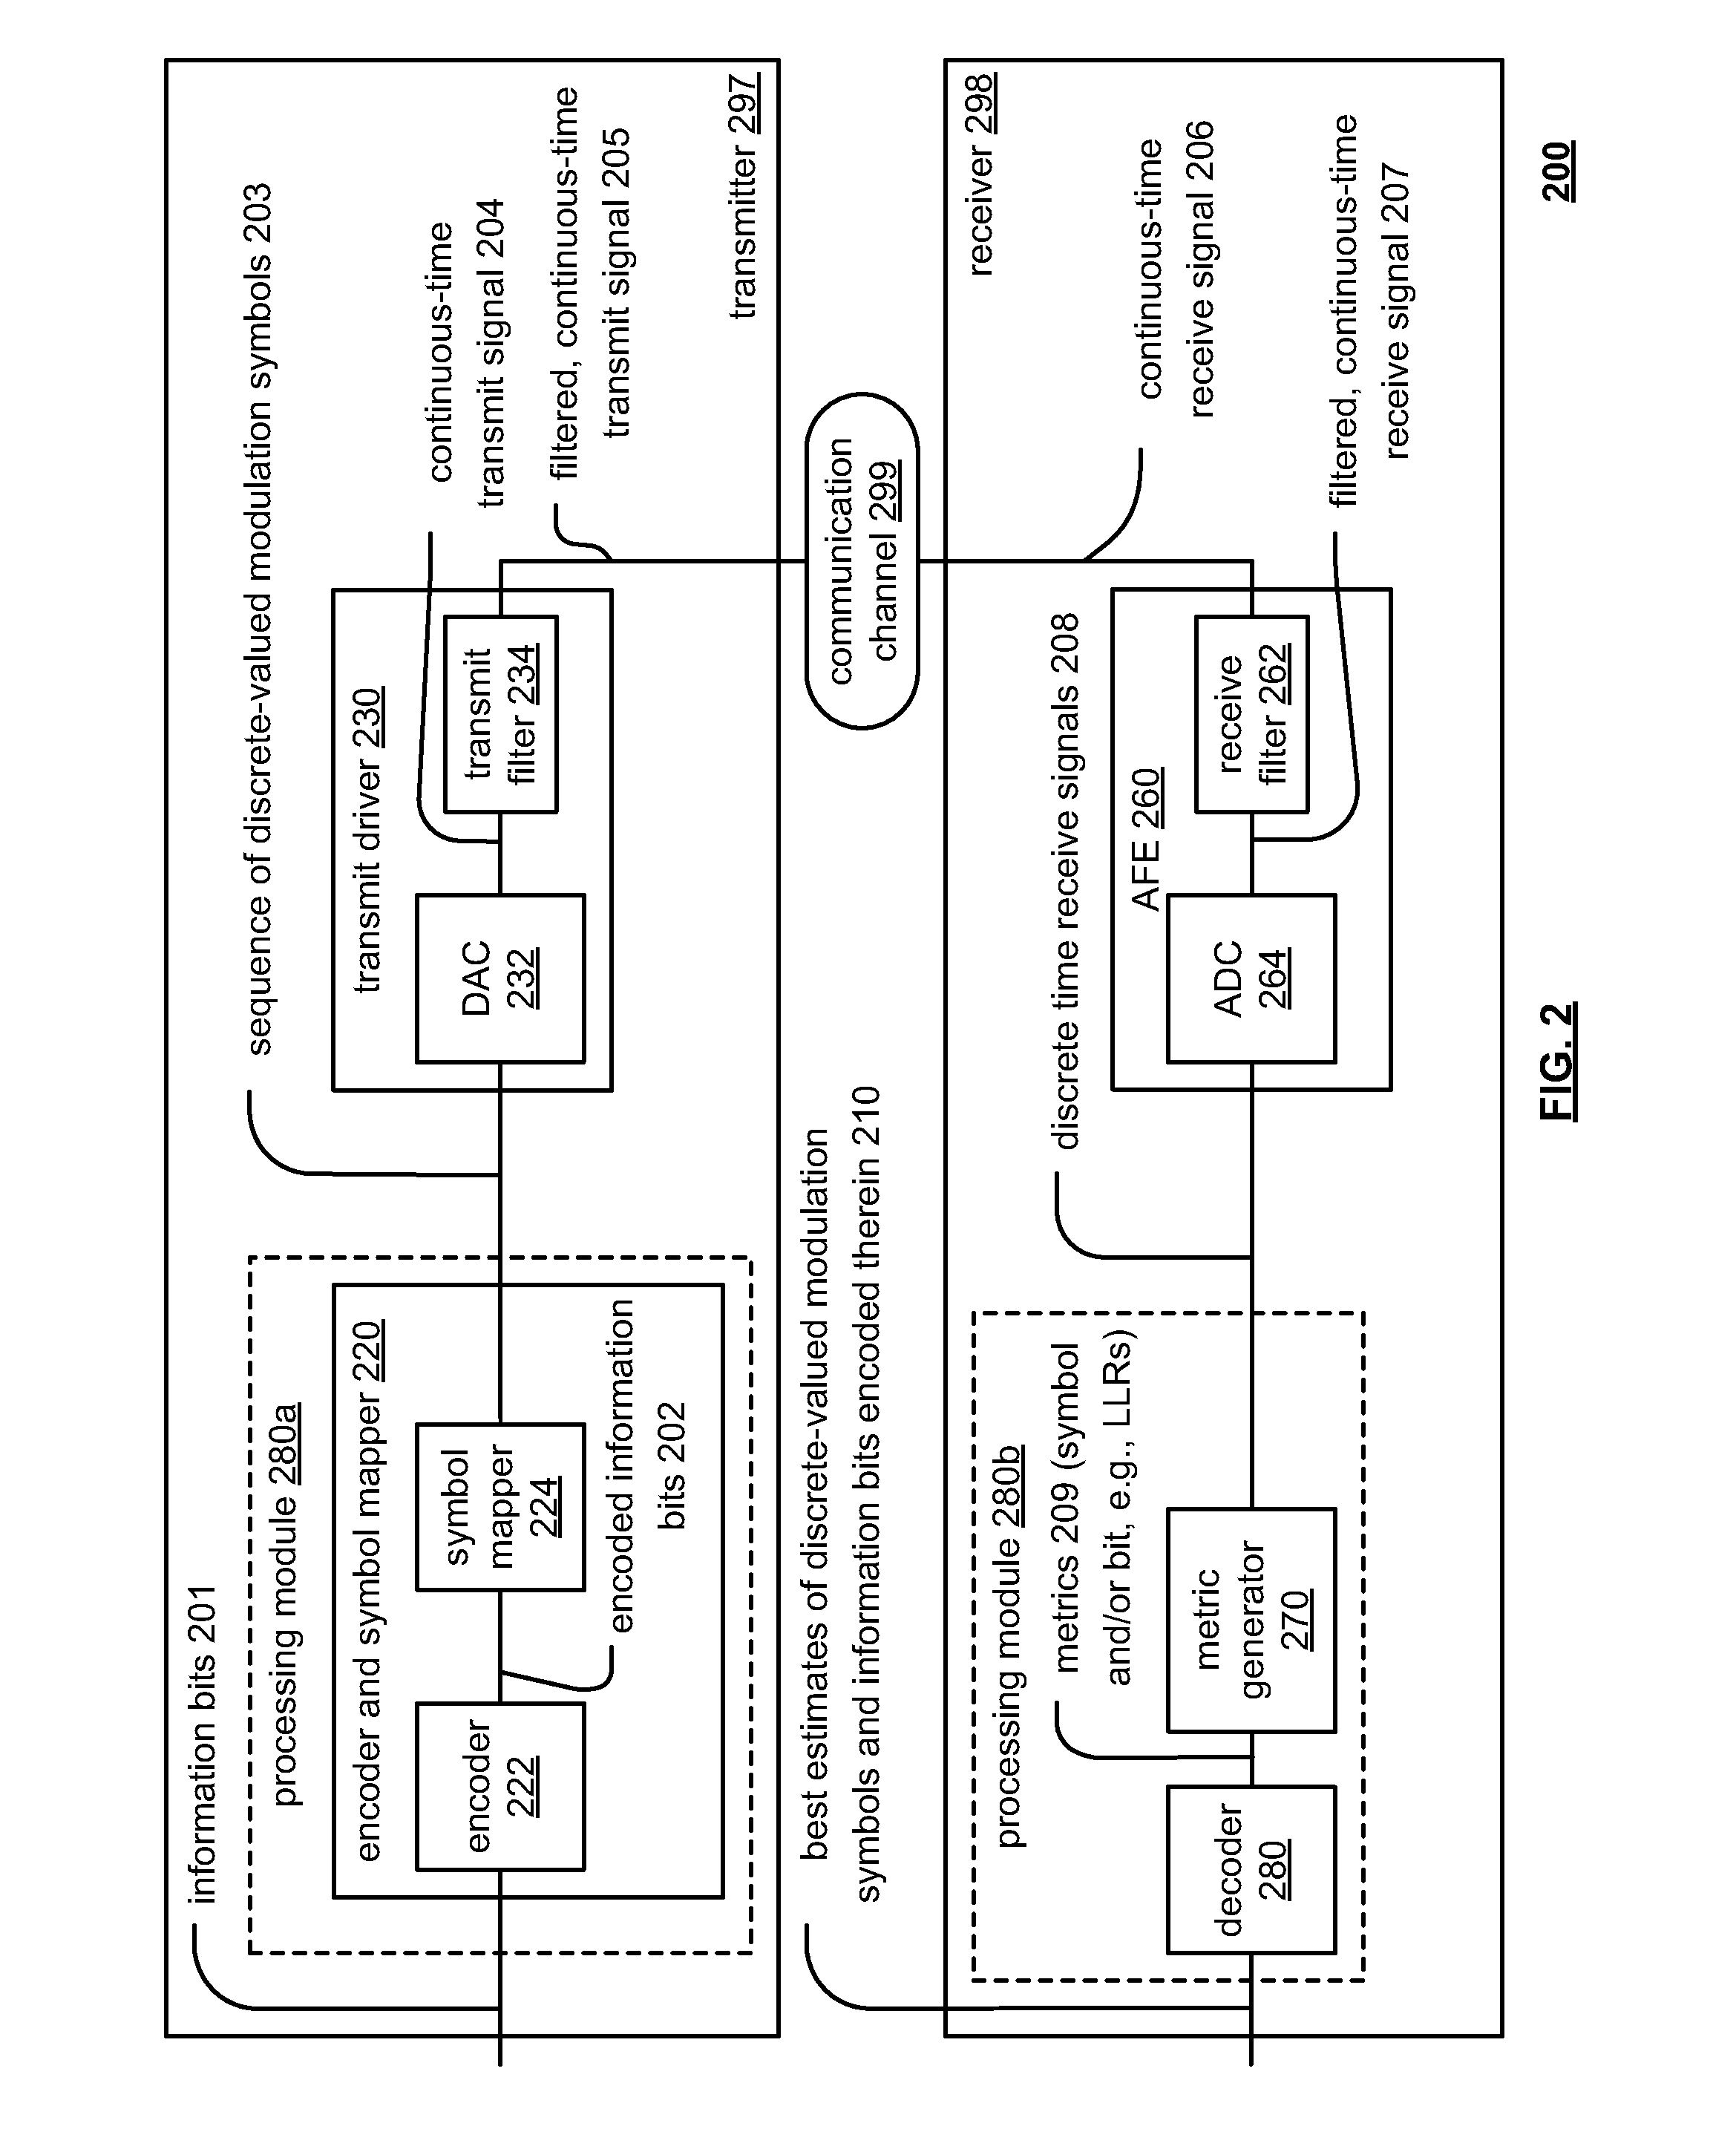 Adaptive loop filter (ALF) padding in accordance with video coding